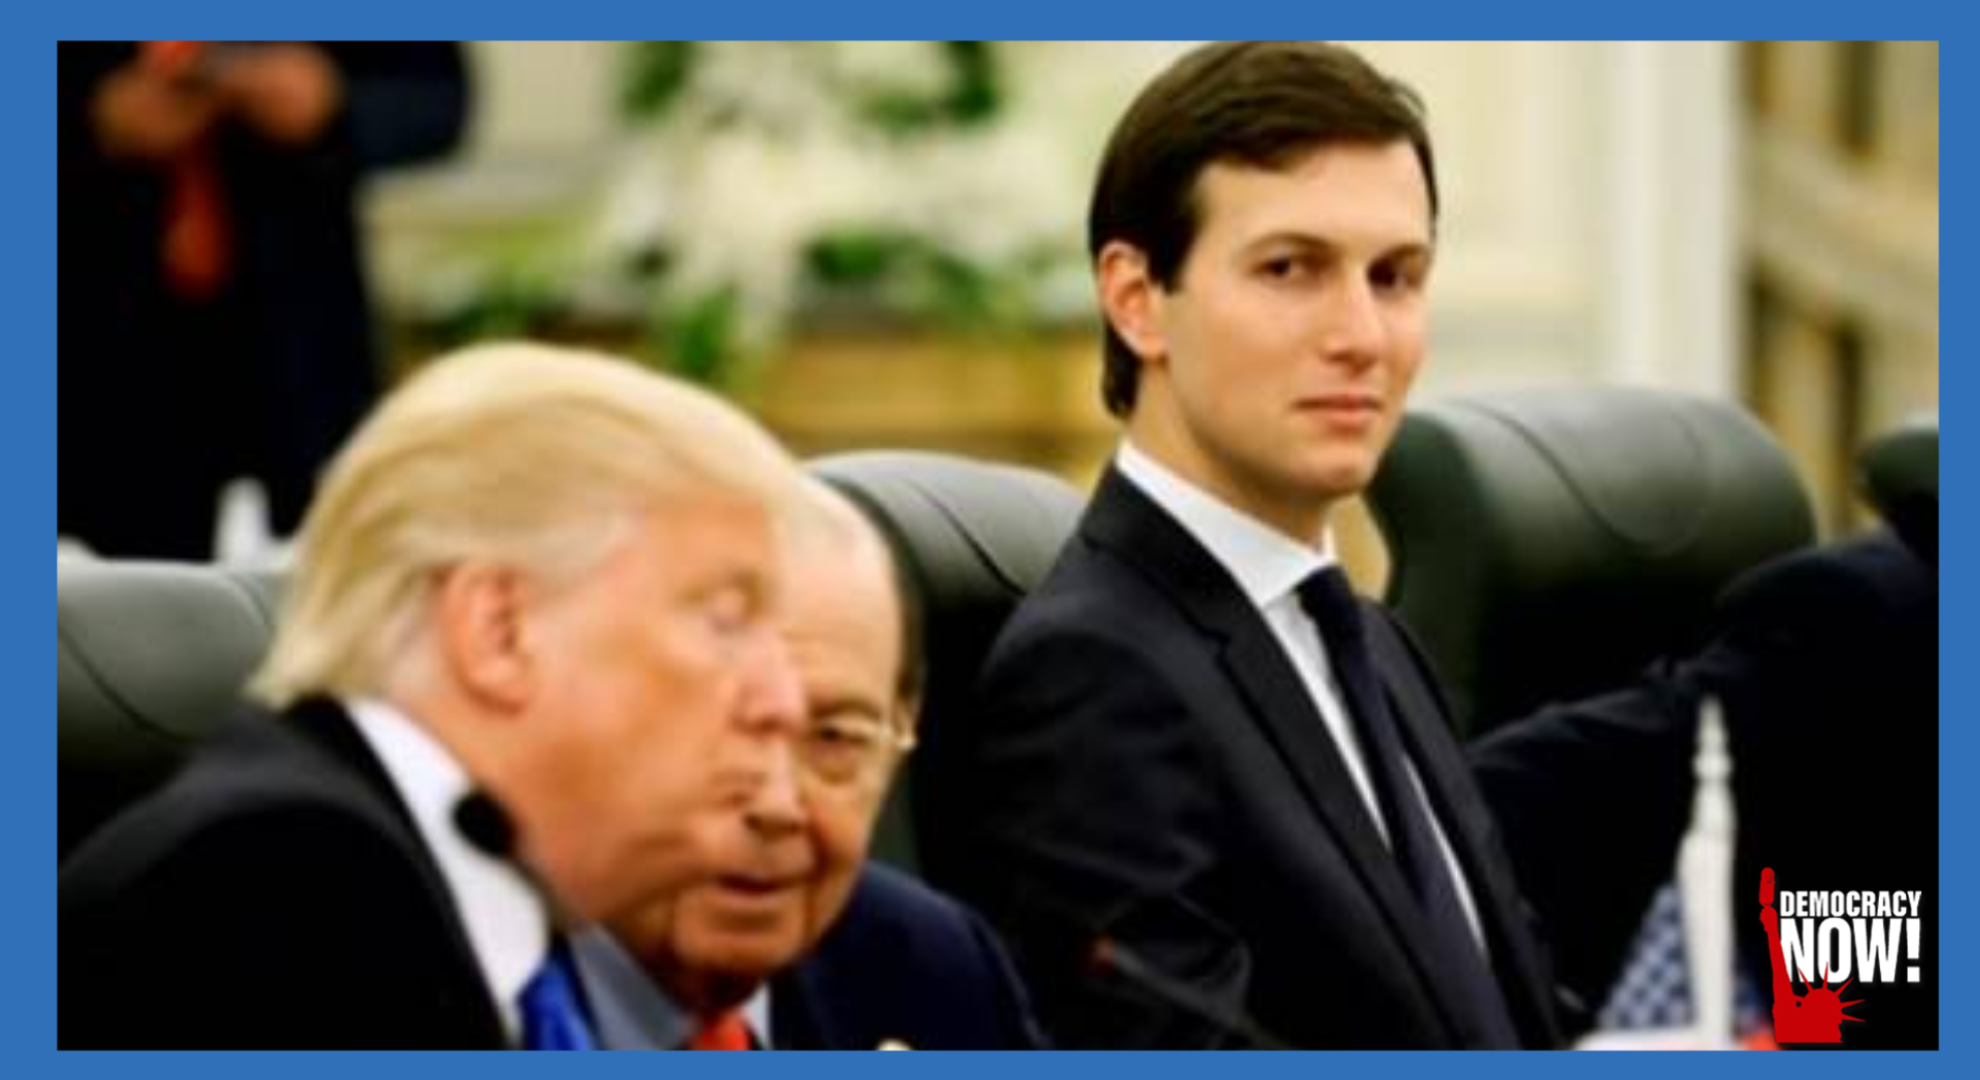 Jared Kushner's Firm to Pay $3.25M for Deceiving & Cheating Tenants in Baltimore's "Kushnerville"